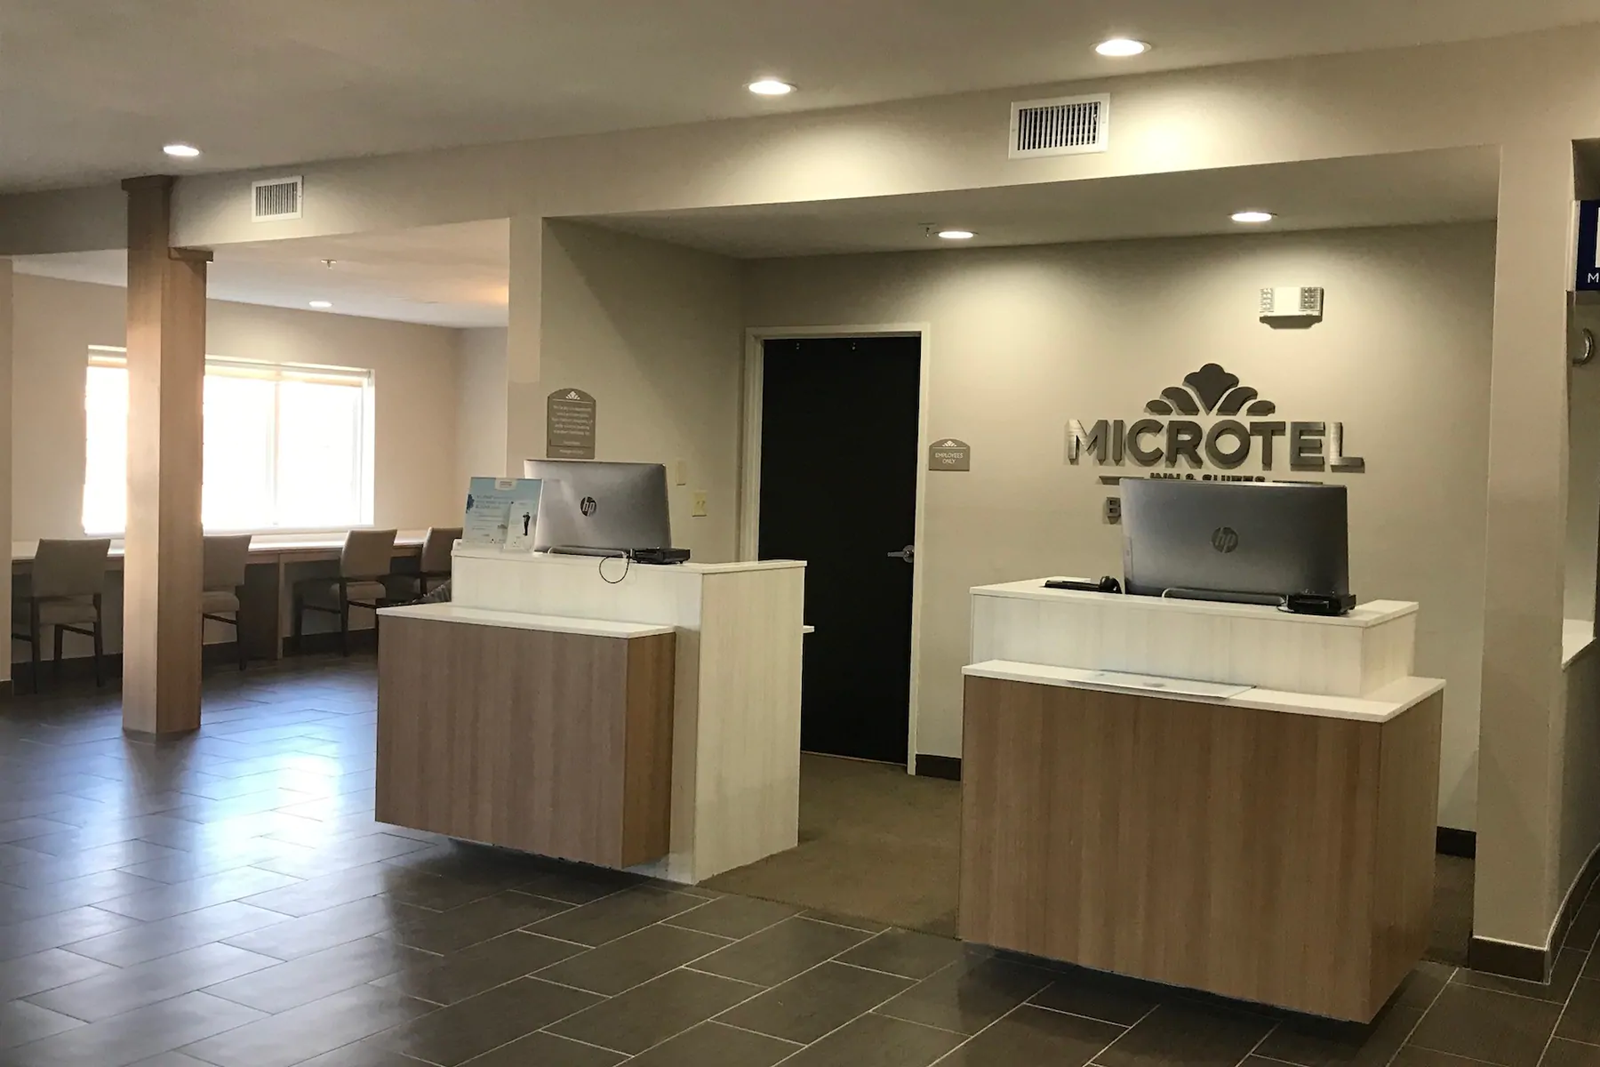 Microtel- College Station